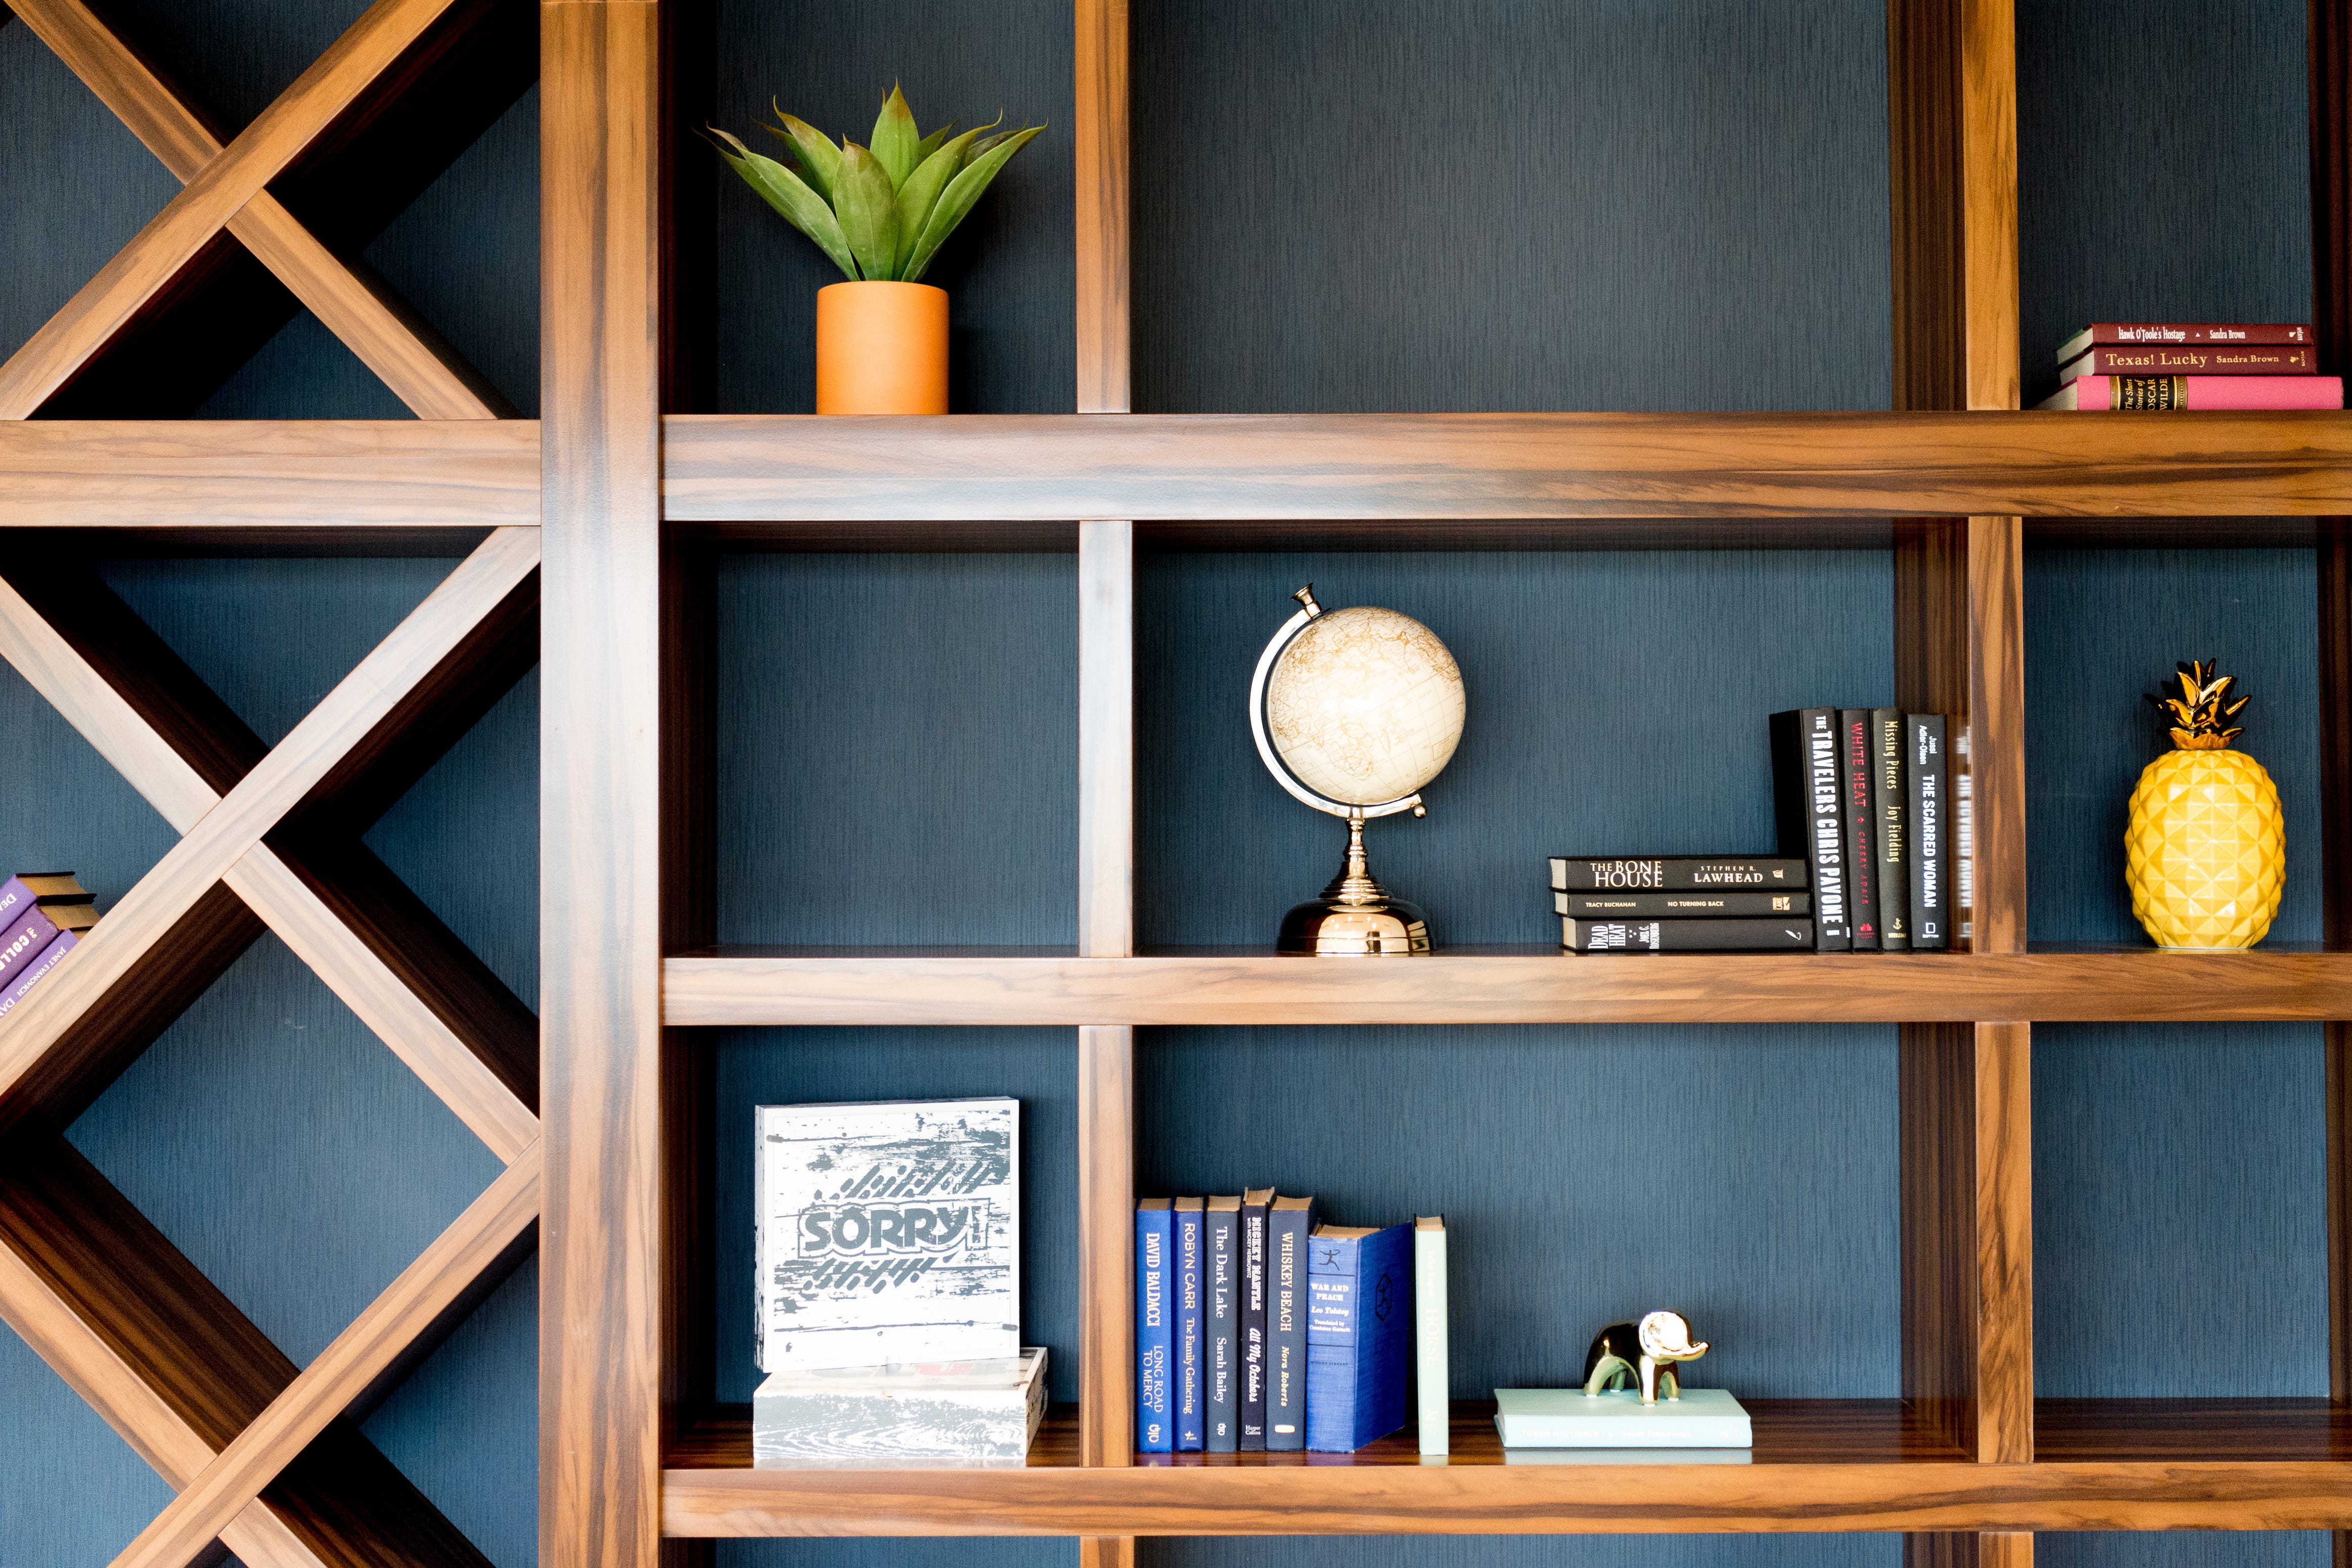 bookcase images